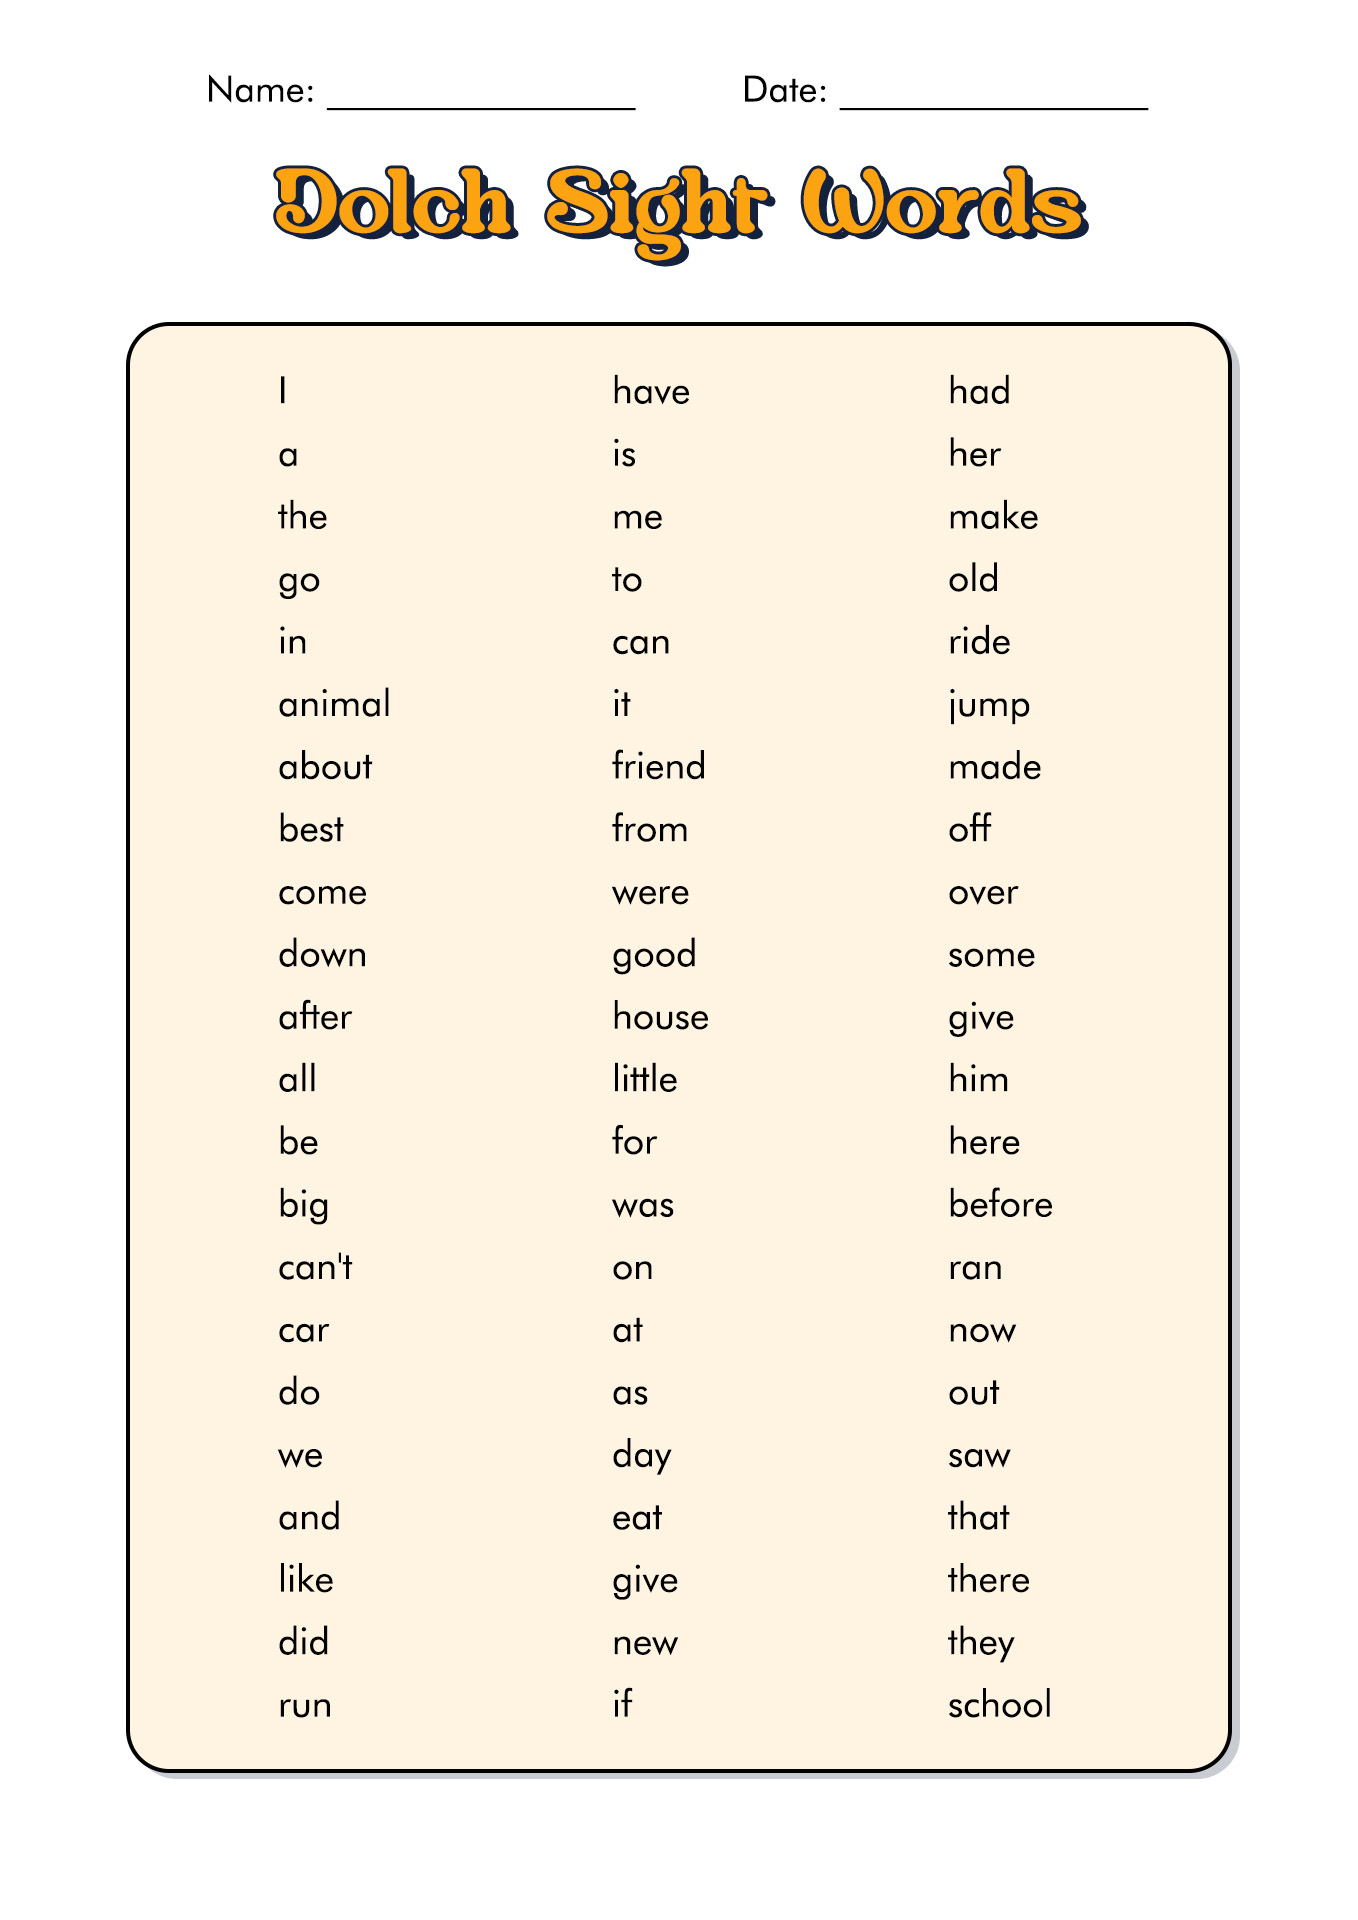 the-first-grade-sight-words-worksheet-is-shown-in-this-printable